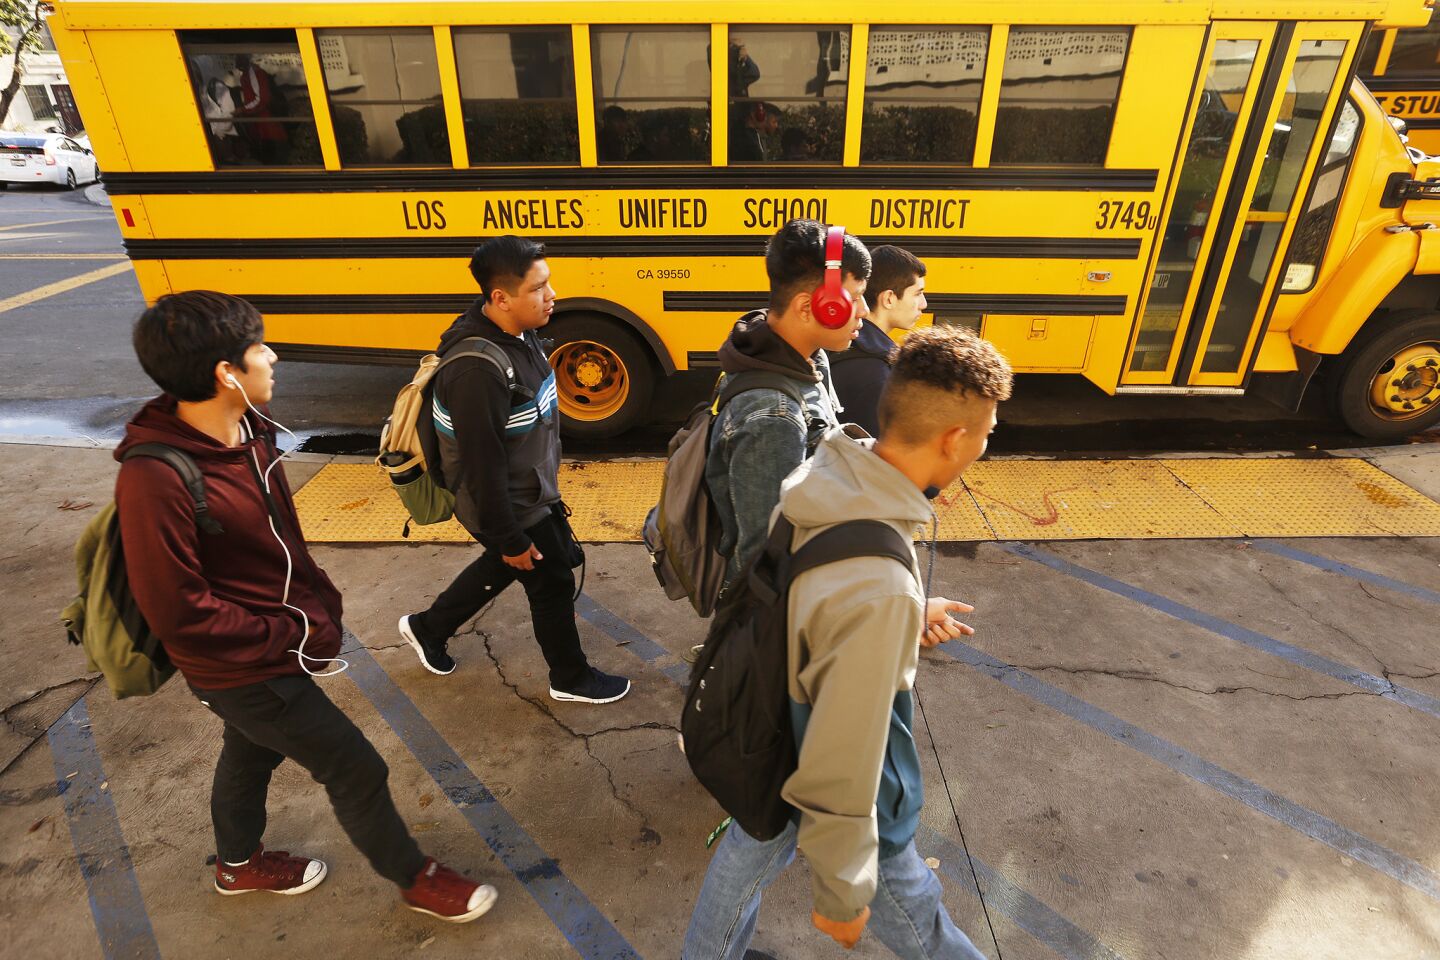 Students depart Belmont High School in Los Angeles after classes on Jan. 9, the first day of school of 2019, while last-ditch bargaining efforts continued to avert a Los Angeles teachers’ strike.